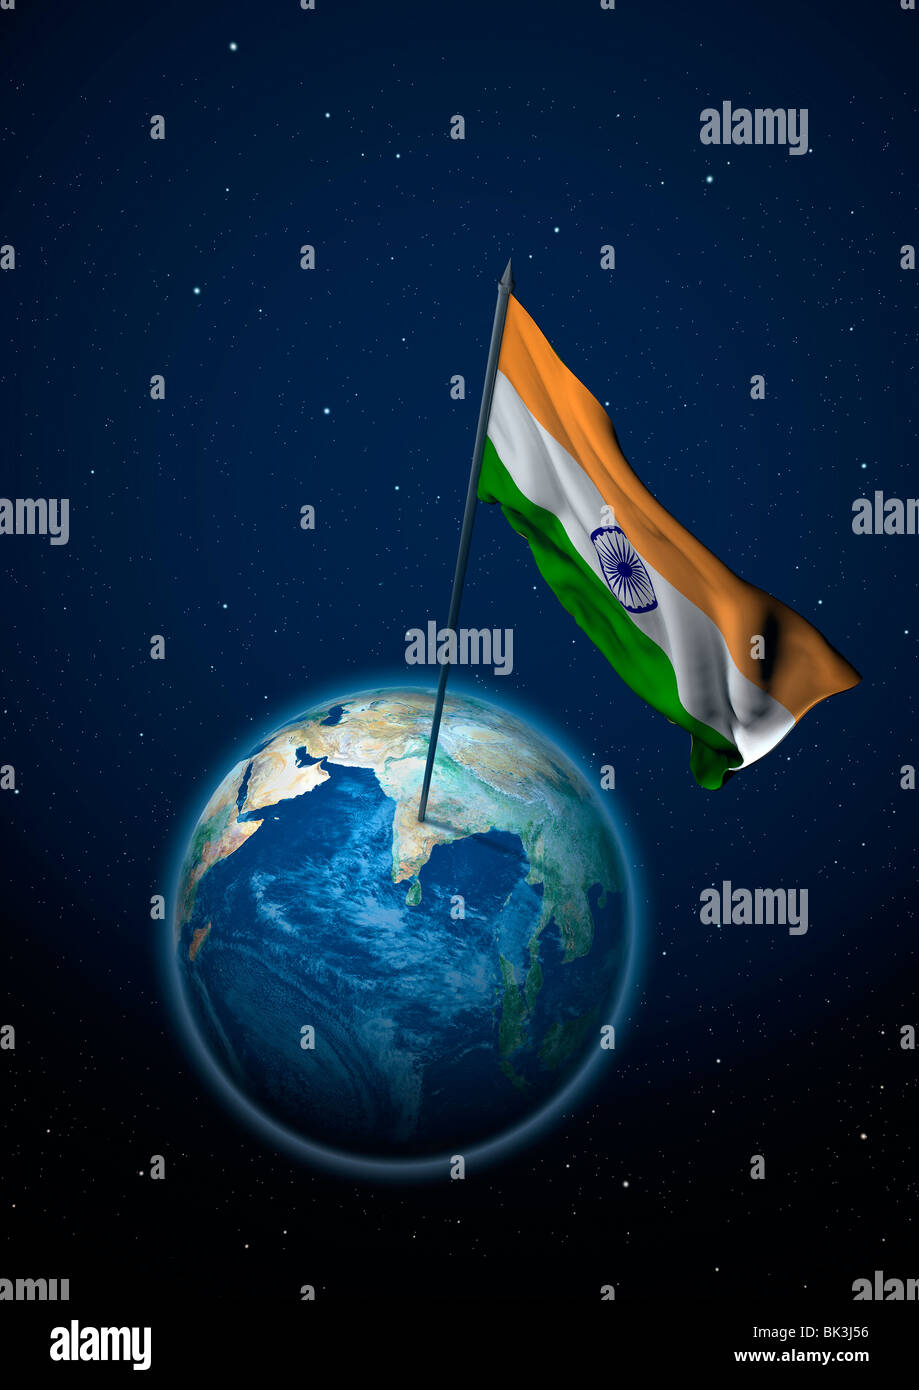 National flag of India in the globe Stock Photo